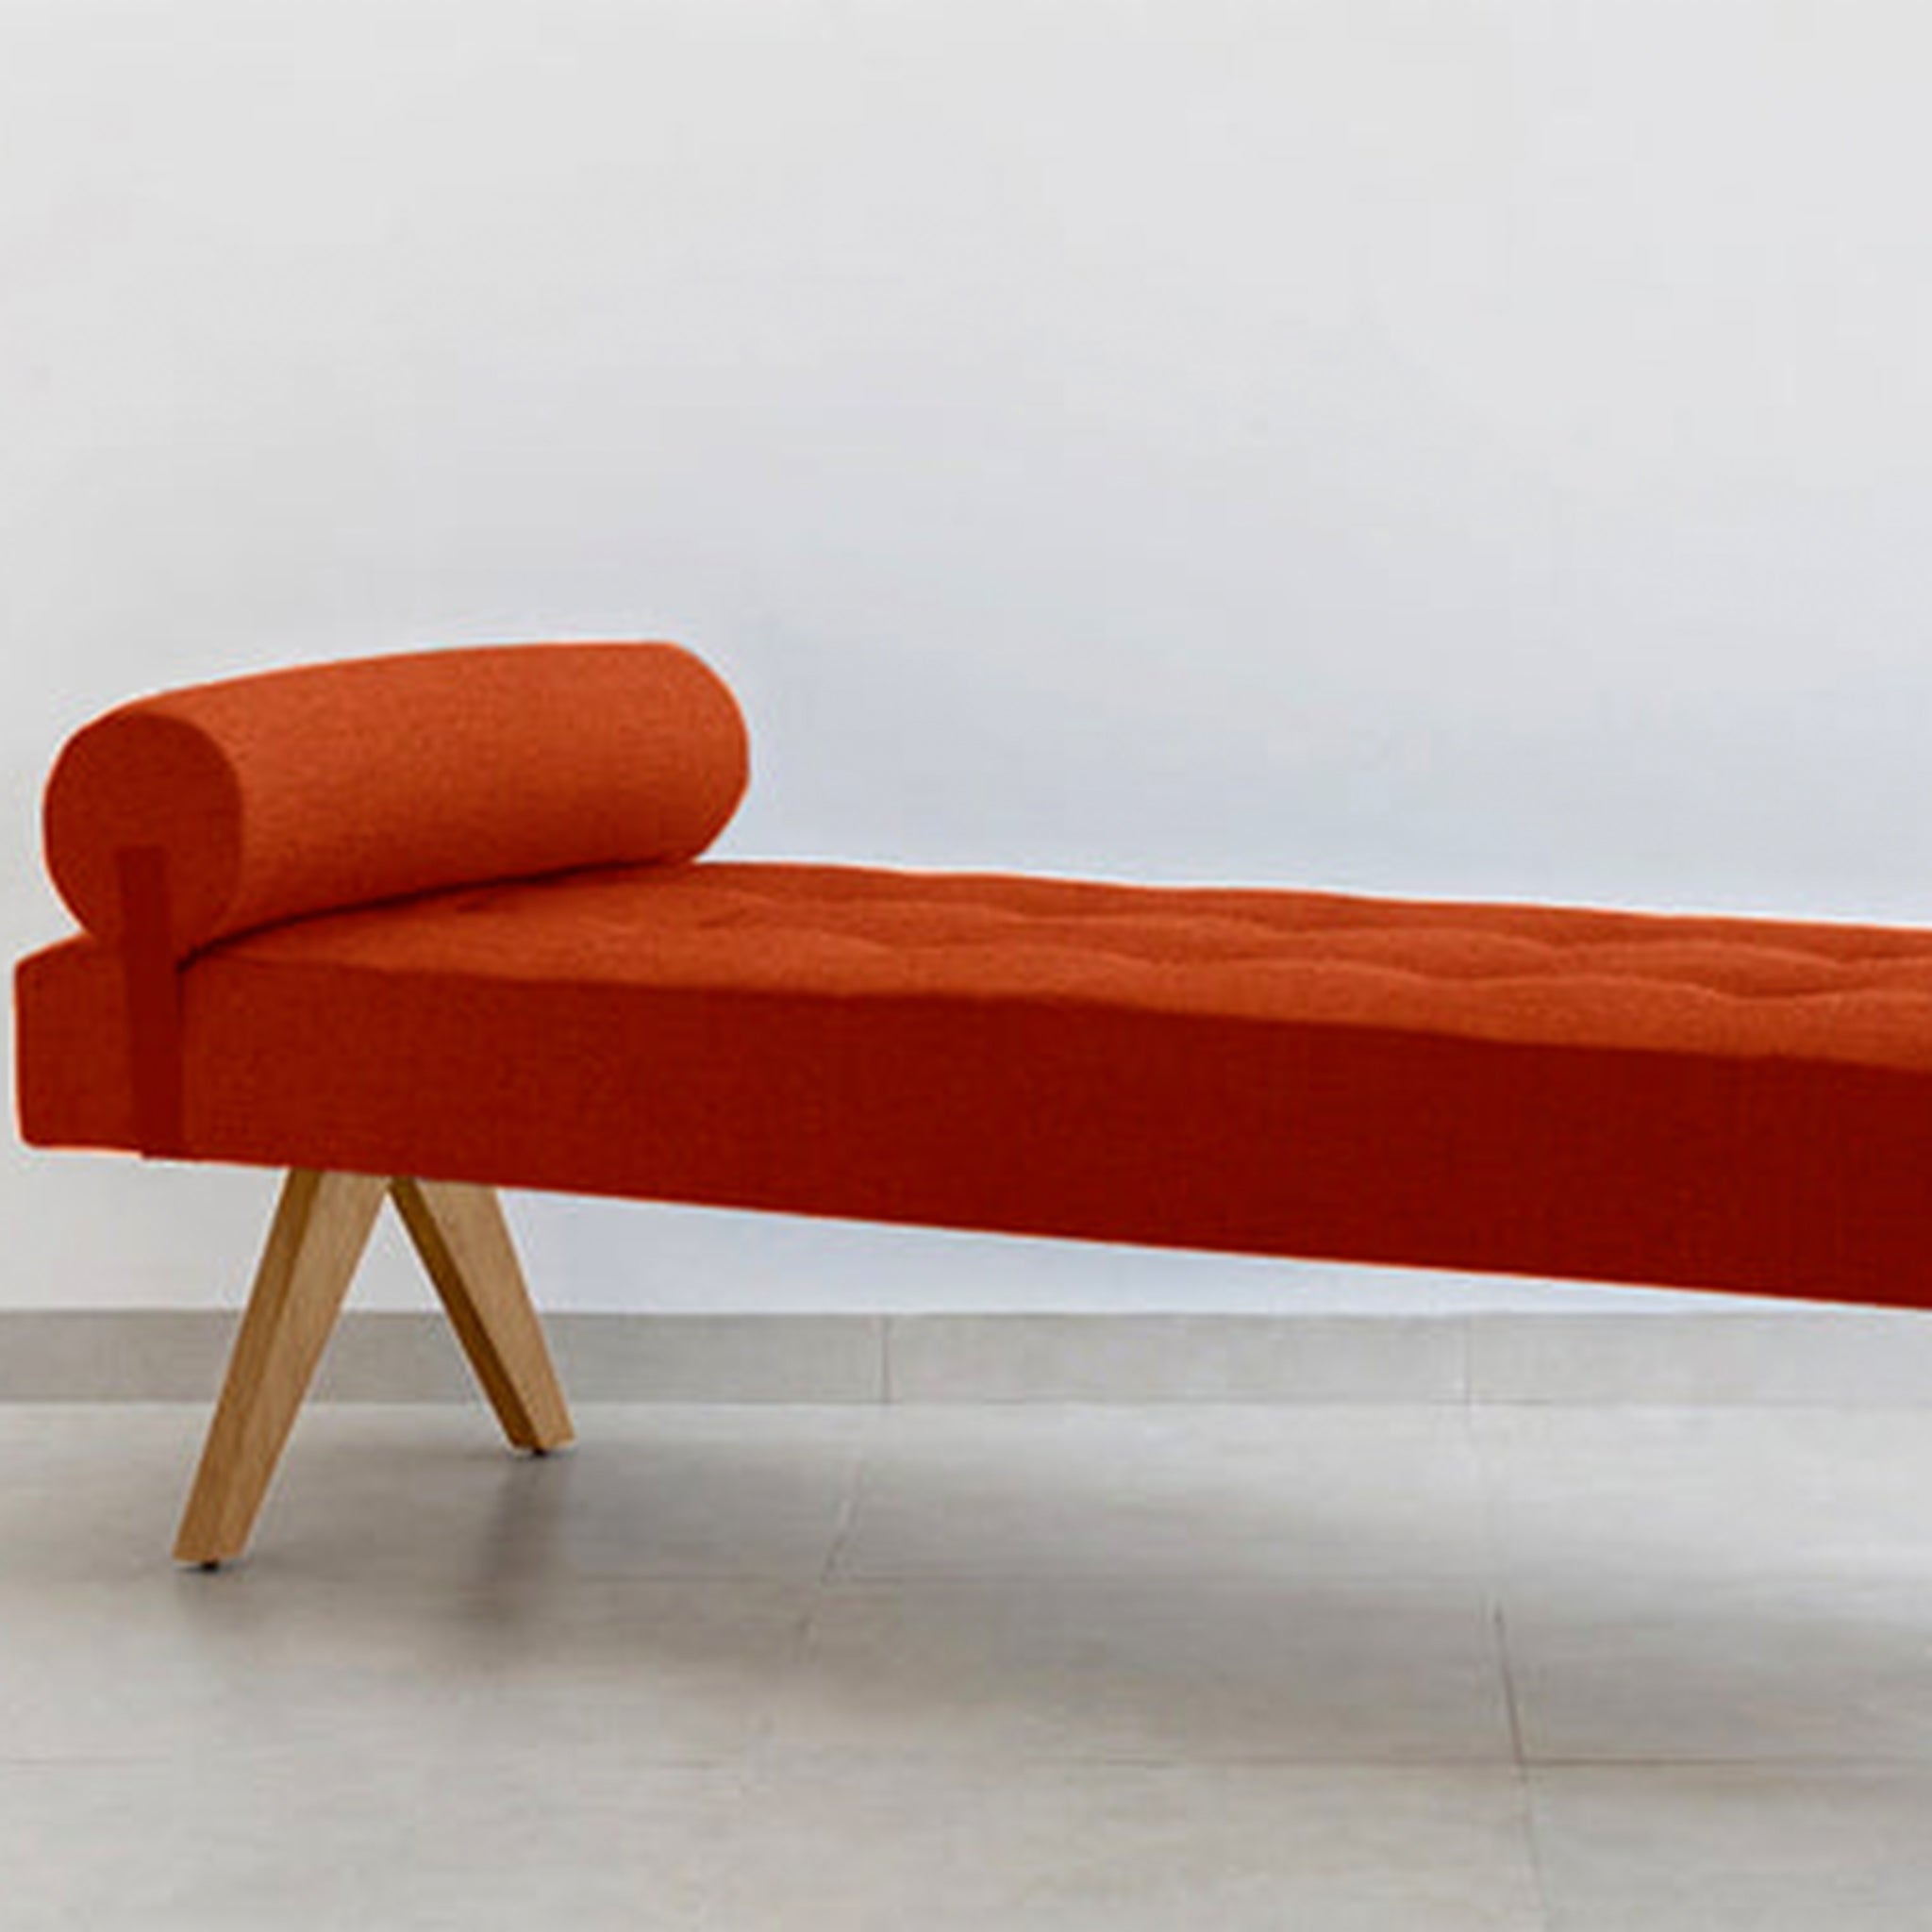 The Jack Daybed ideal for lounging and relaxation